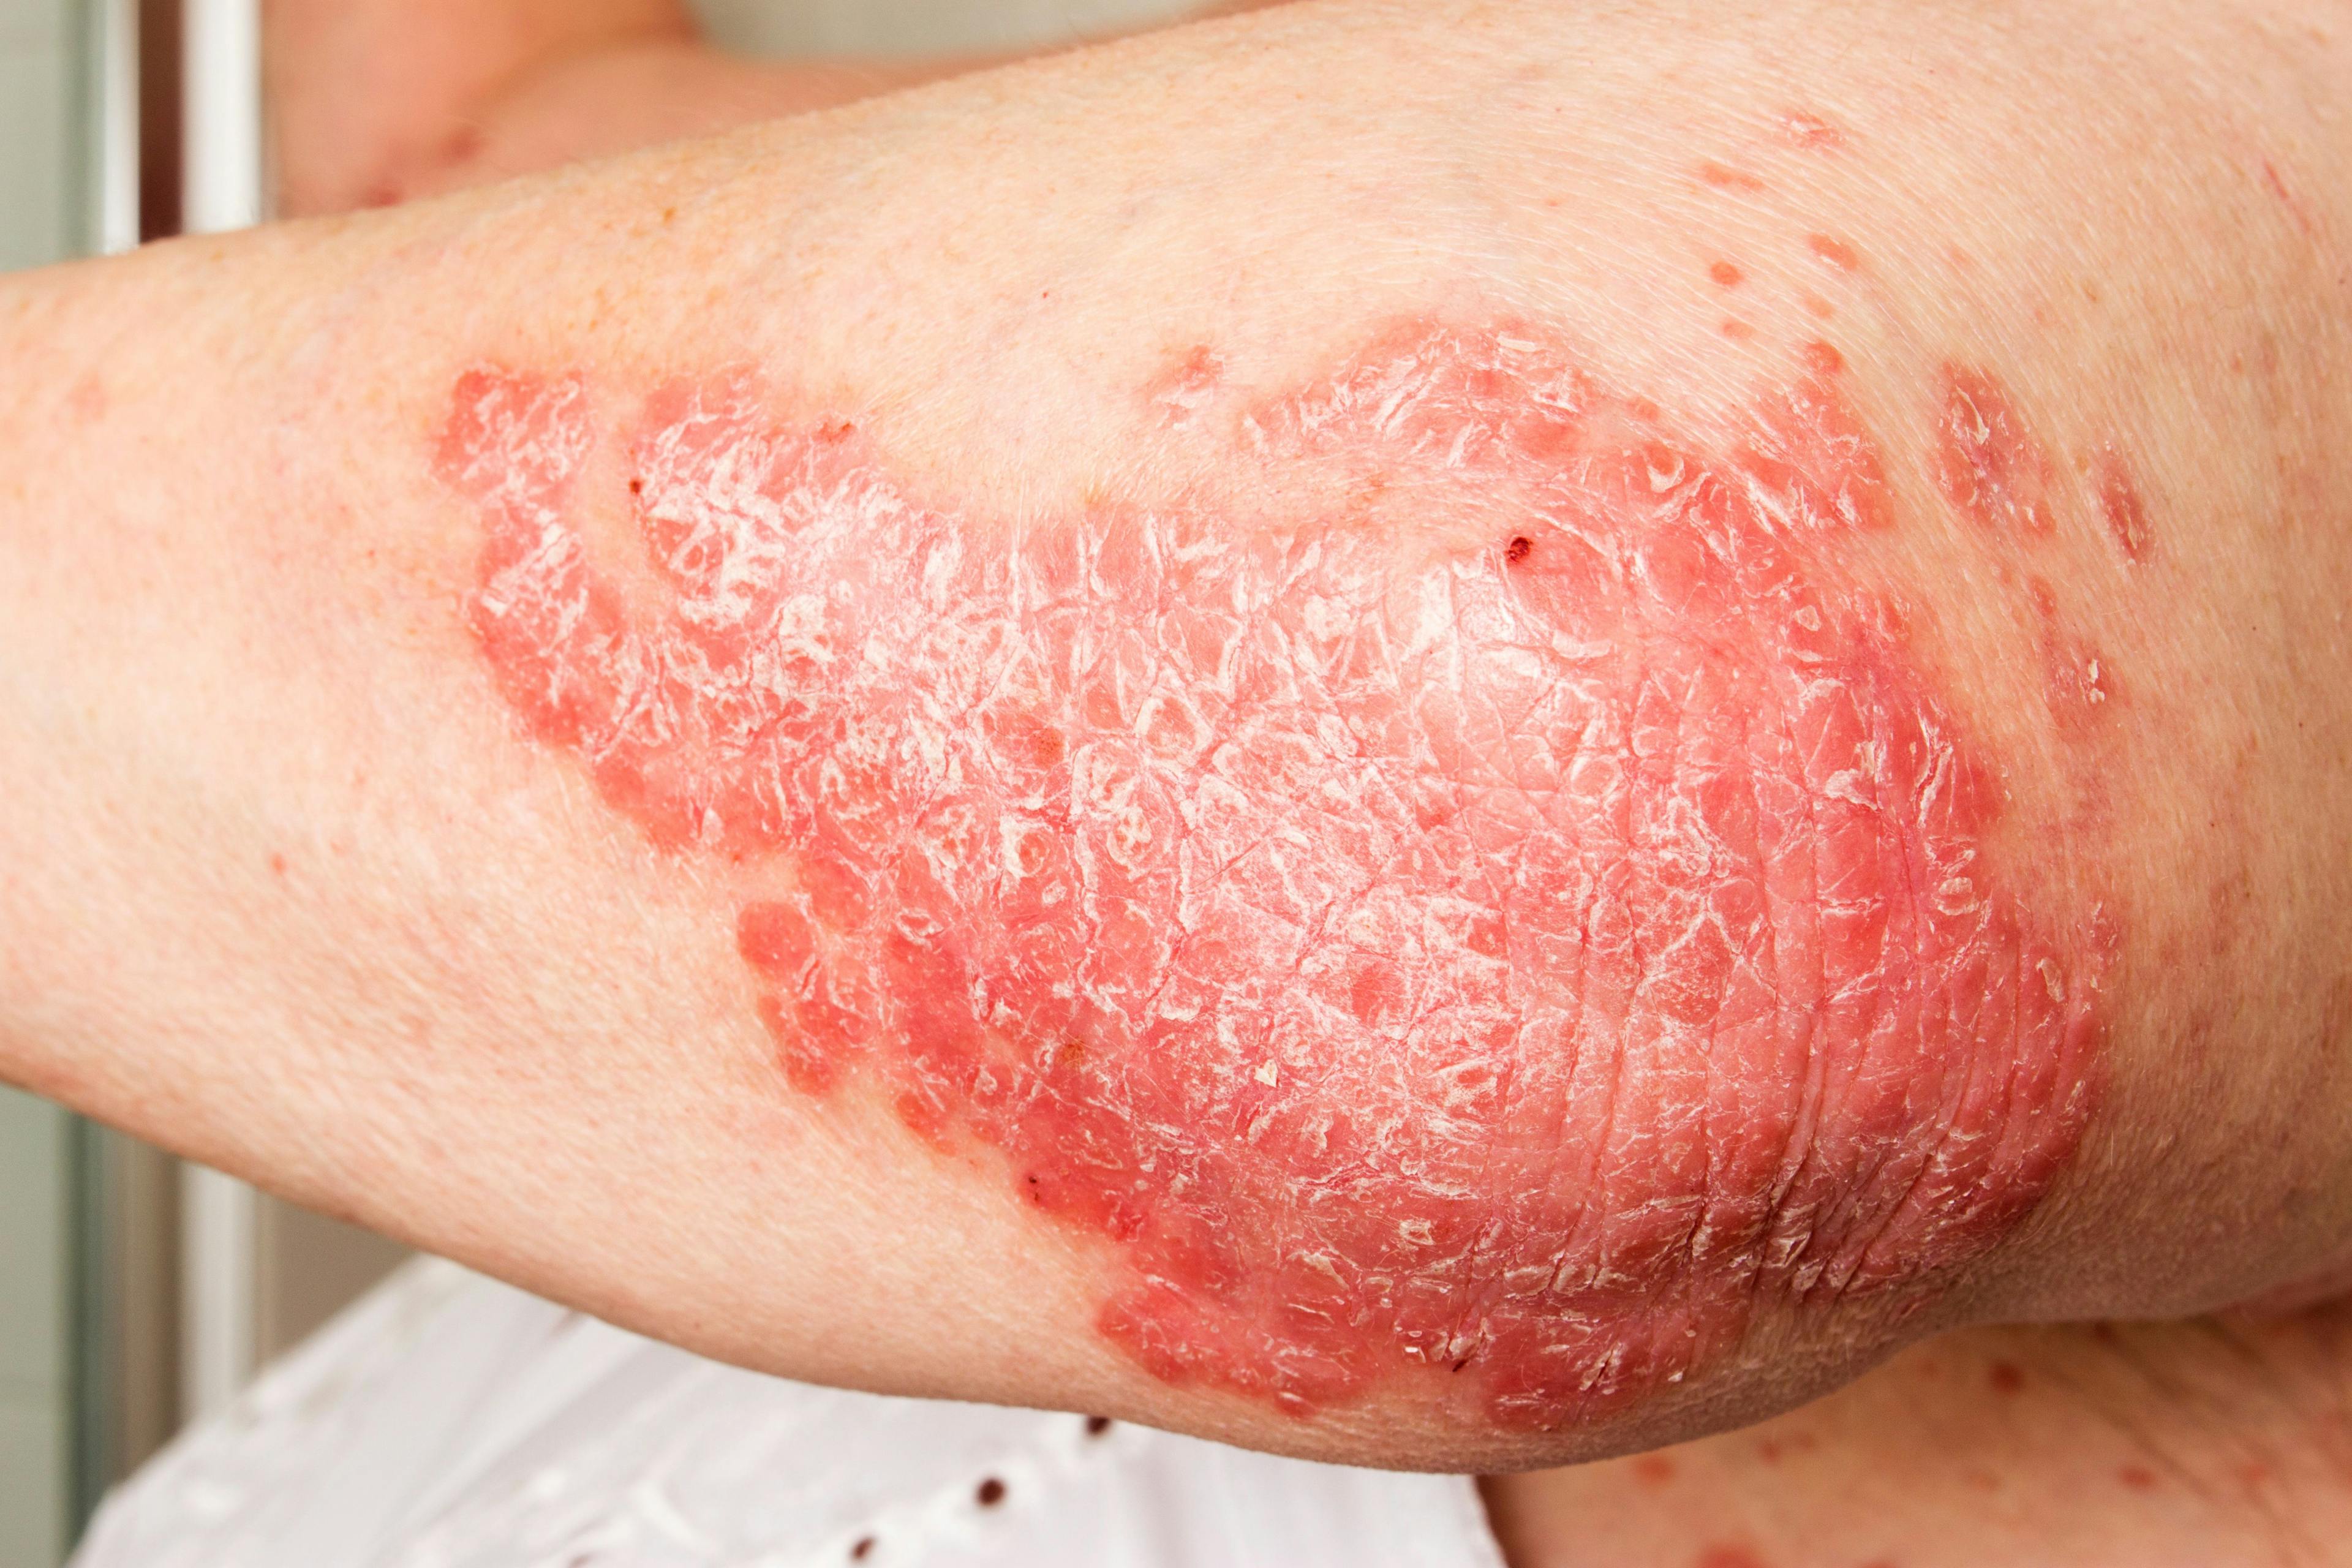 Psychological Support for Patients With Psoriasis Significantly Expedites Post-Surgery Wound Healing